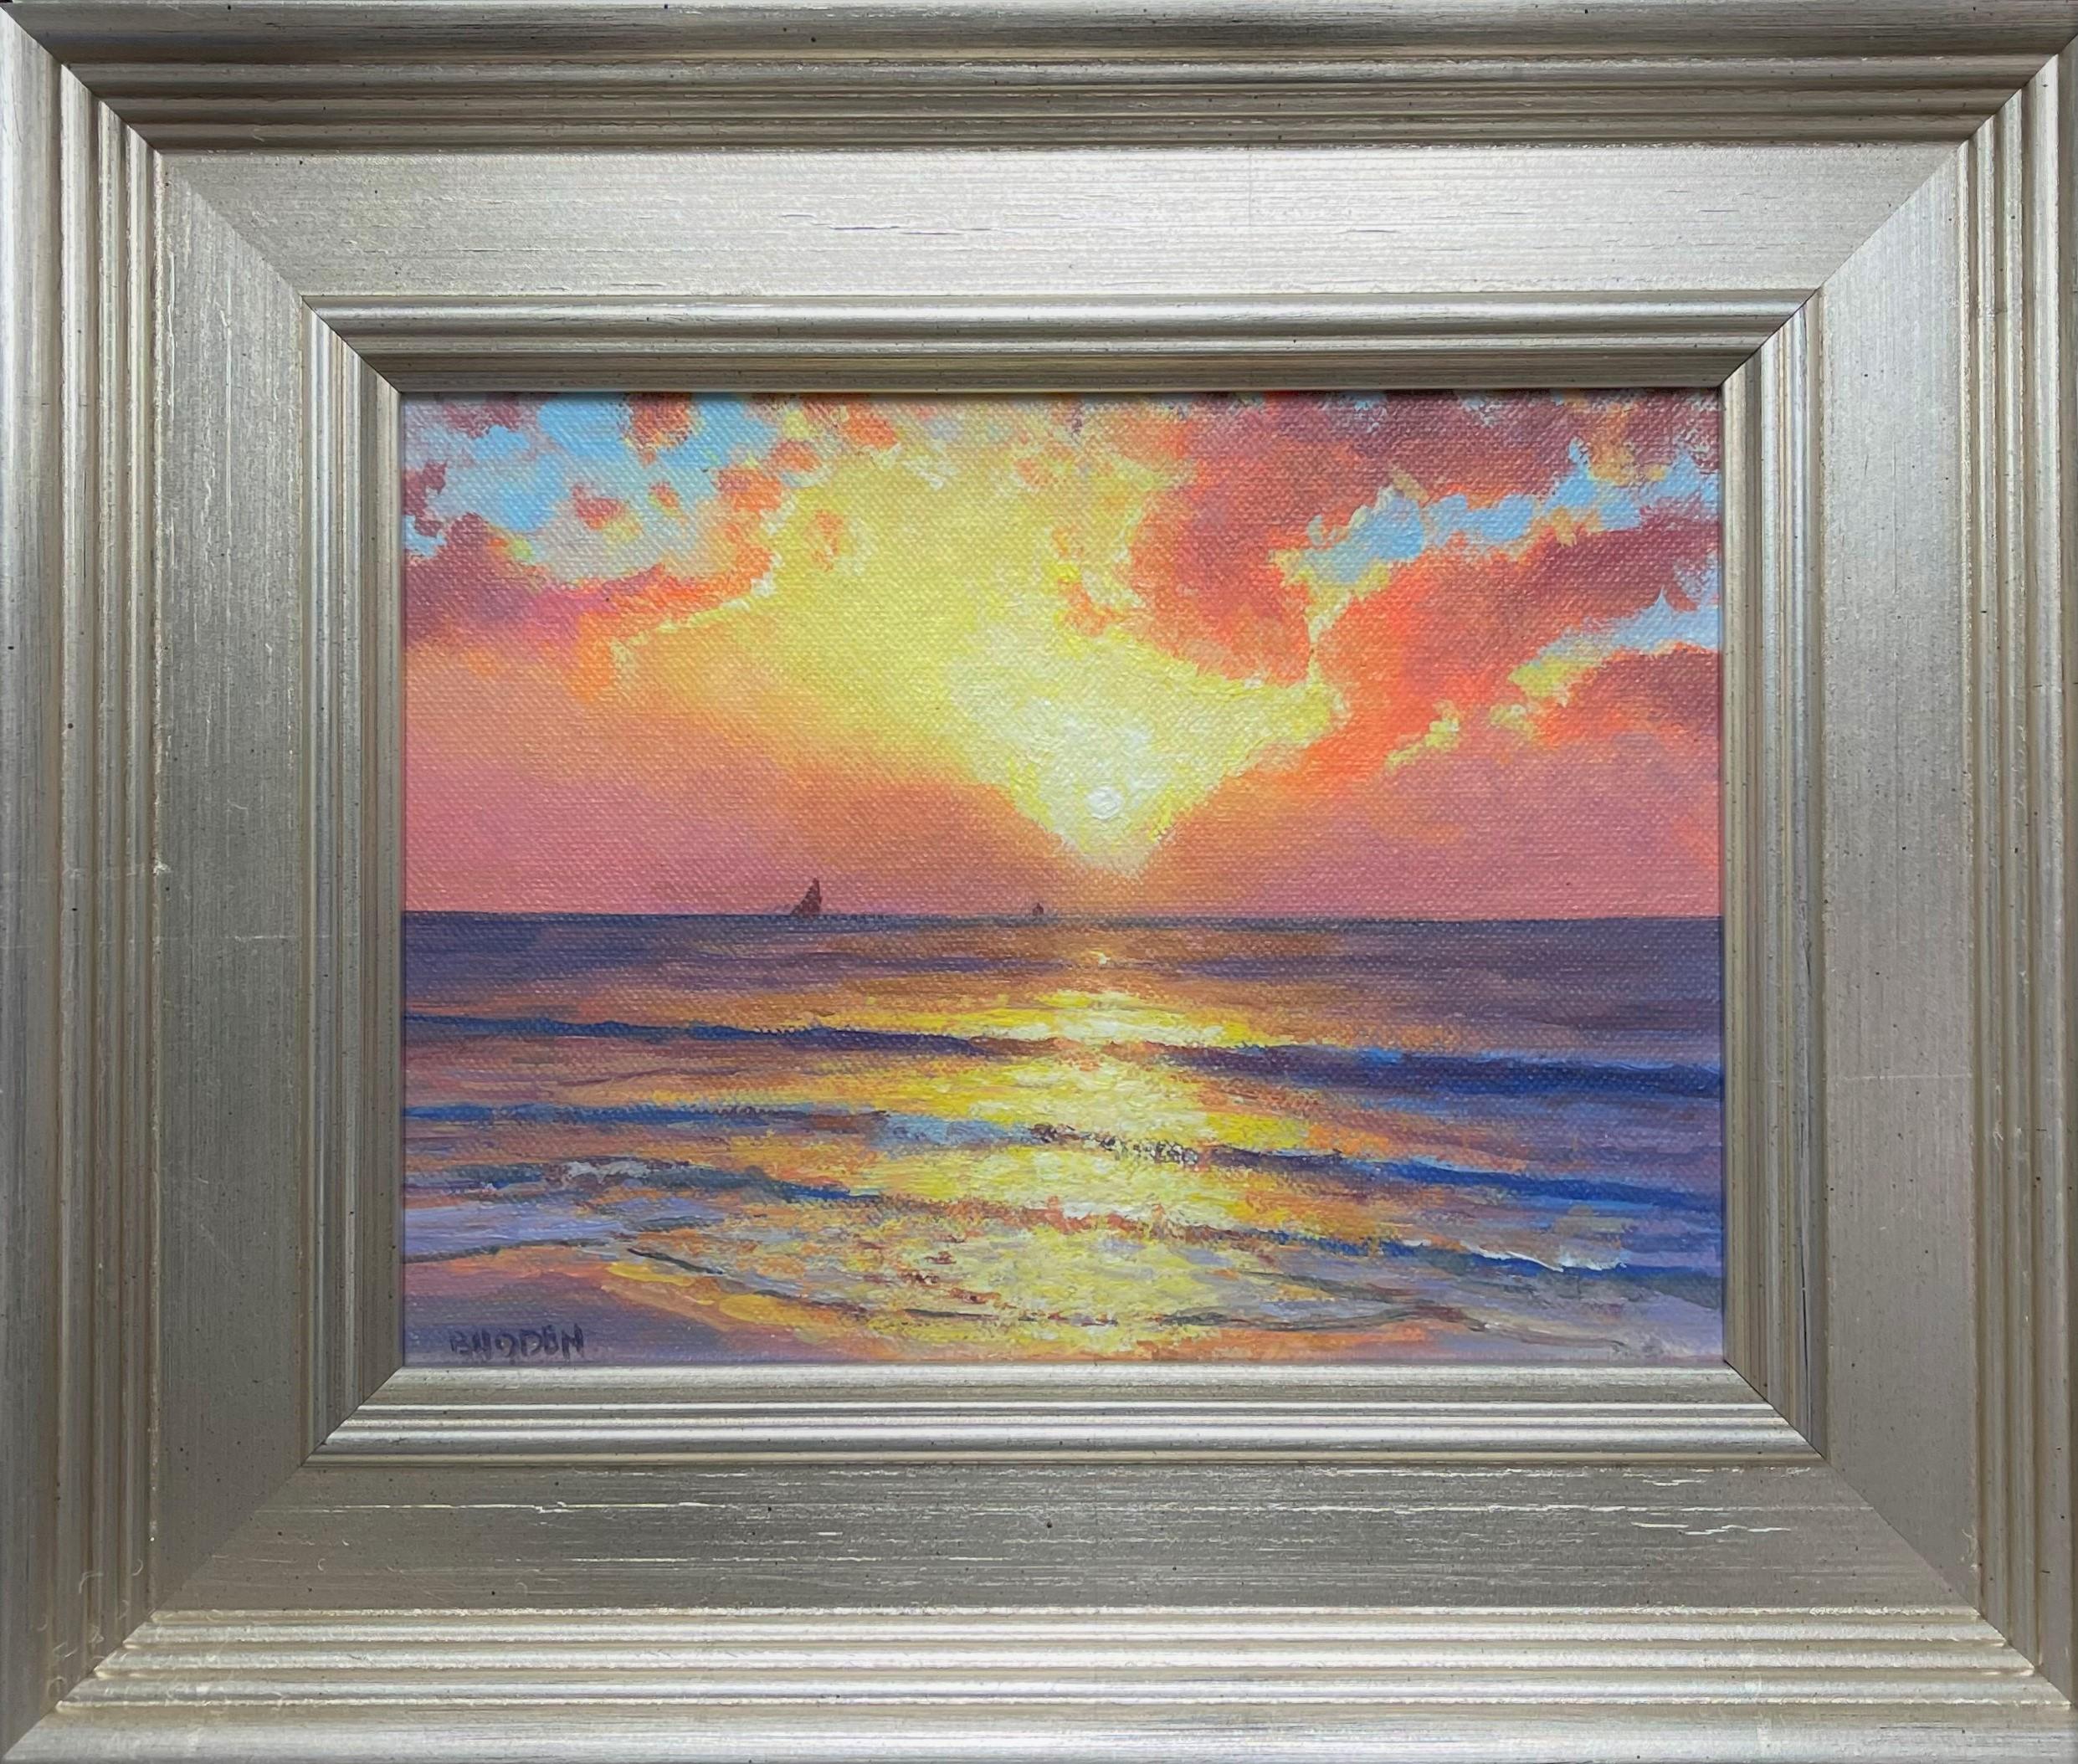 Morning Sun III
oil/panel 6 x 8 image
Morning Sun III is an oil painting on canvas panel by award winning contemporary artist Michael Budden that showcases a uniquely beautiful seascape nocturne with sail boats on the distant horizon.. This painting